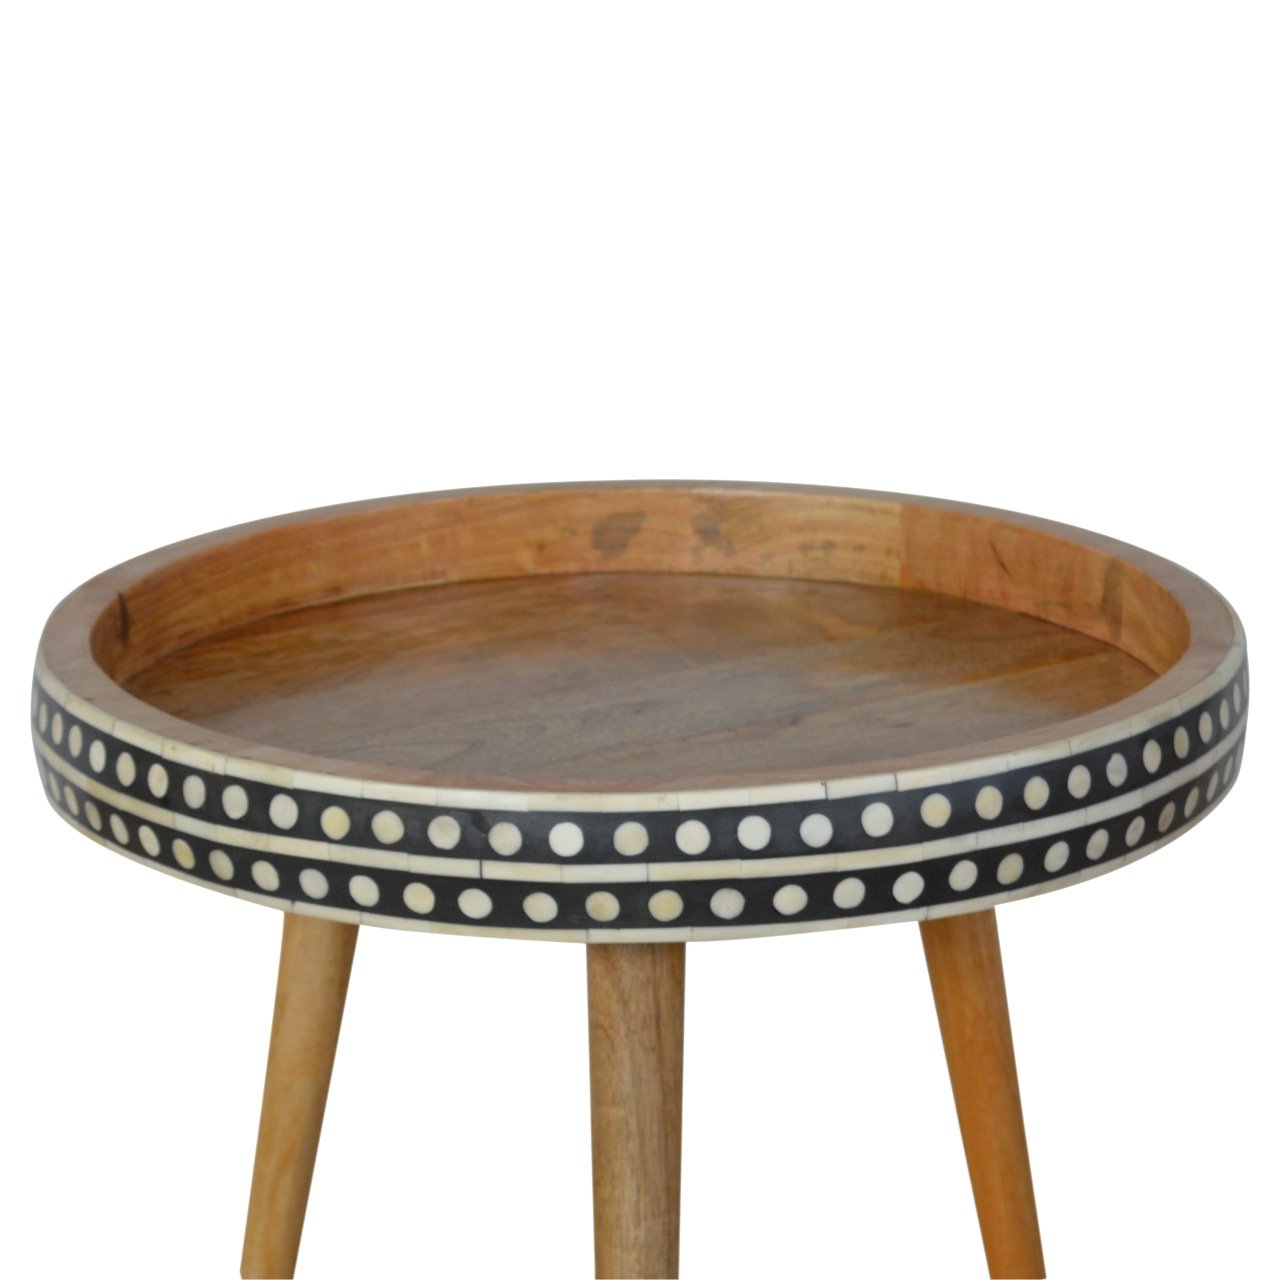 Large Patterned Nordic Style End Table